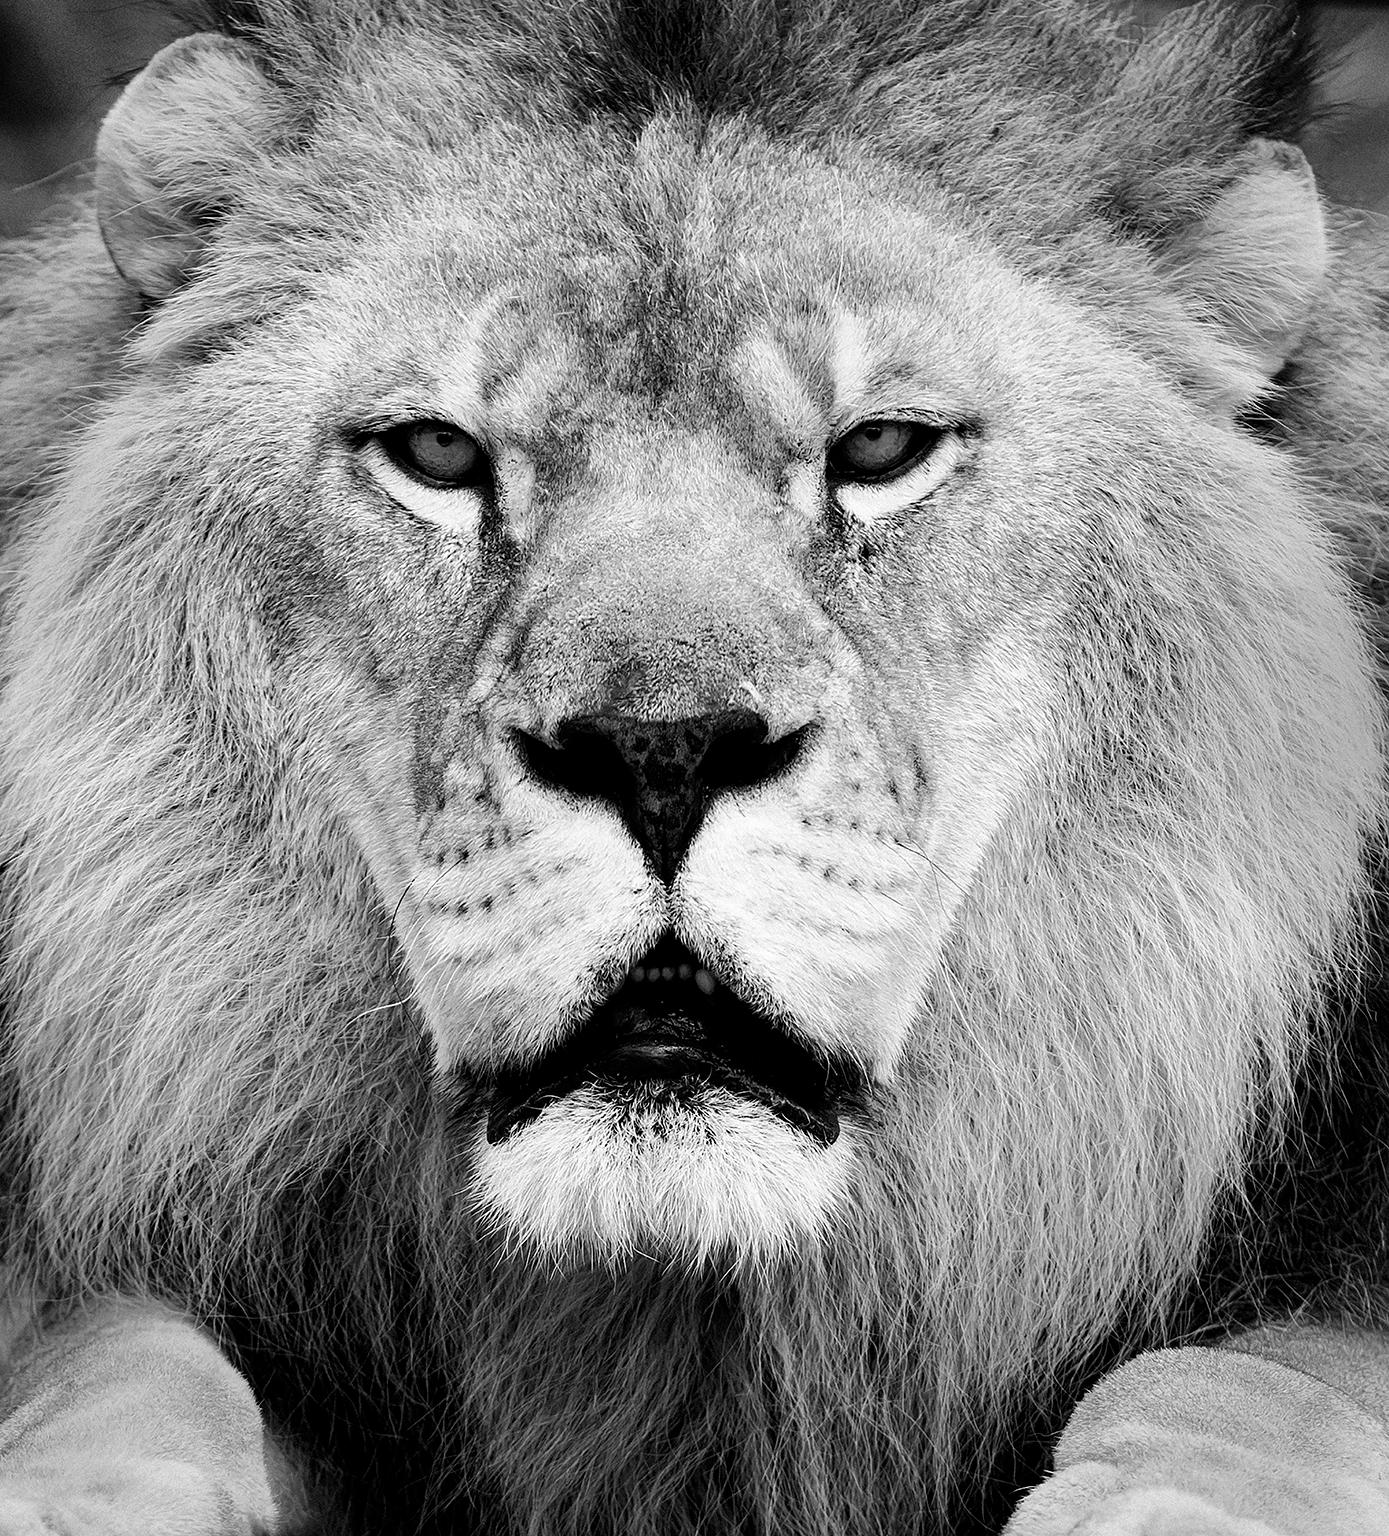 Shane Russeck Animal Print - "Face Off" 36x48  - Black & White  Fine Art Photography, Lion Photograph Africa